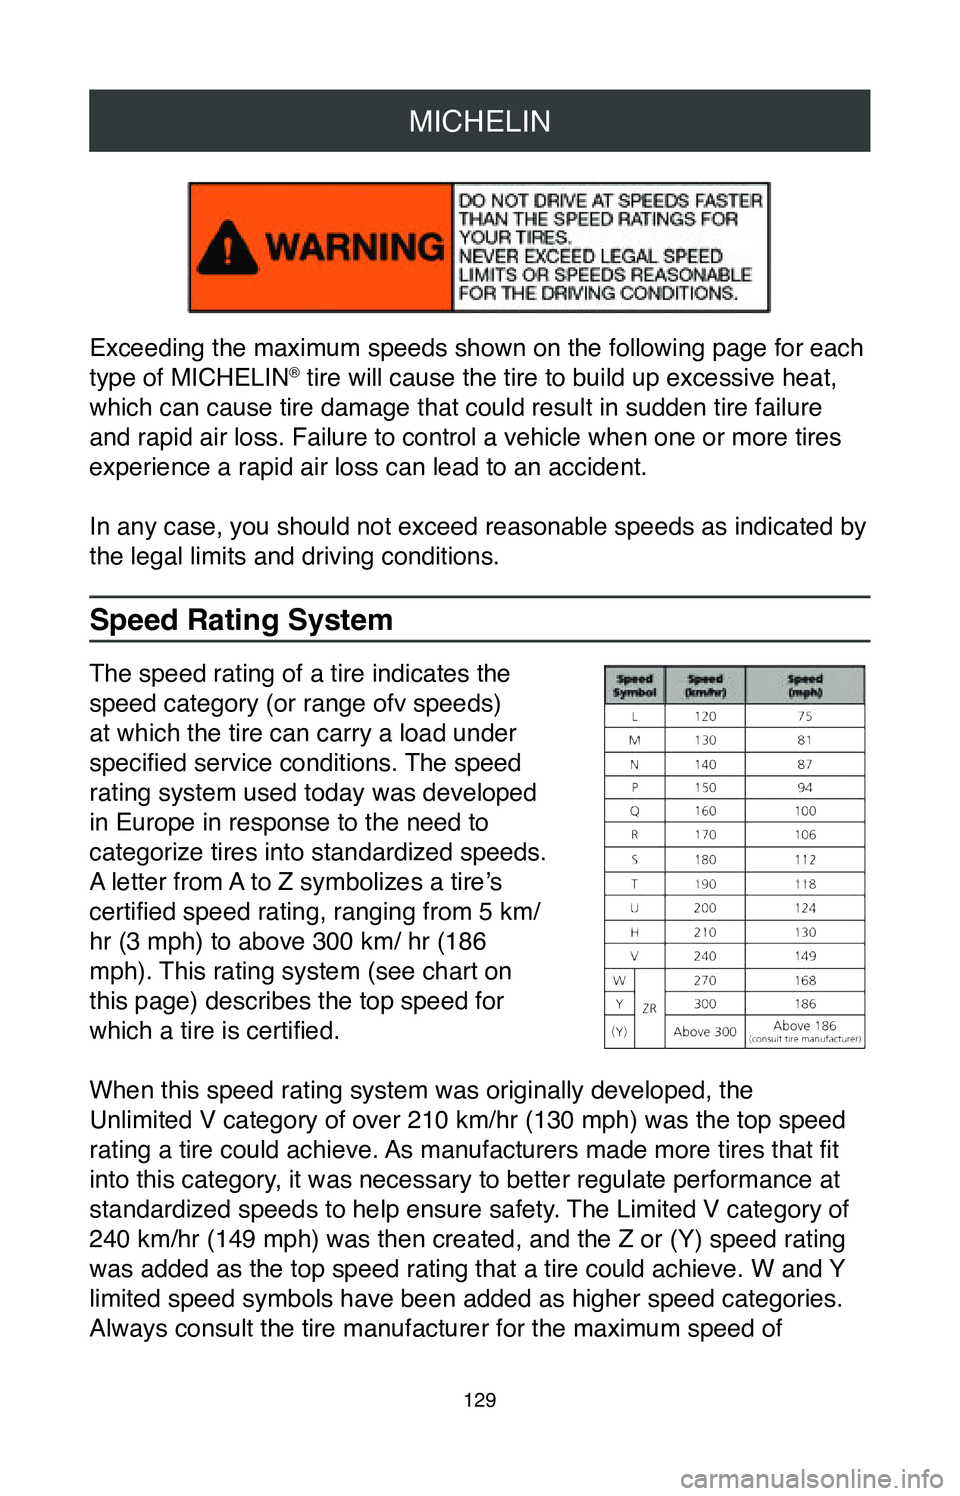 TOYOTA COROLLA HYBRID 2020  Warranties & Maintenance Guides (in English) MICHELIN
129
Exceeding the maximum speeds shown on the following page for each 
type of MICHELIN® tire will cause the tire to build up excessive heat, 
which can cause tire damage that could result i